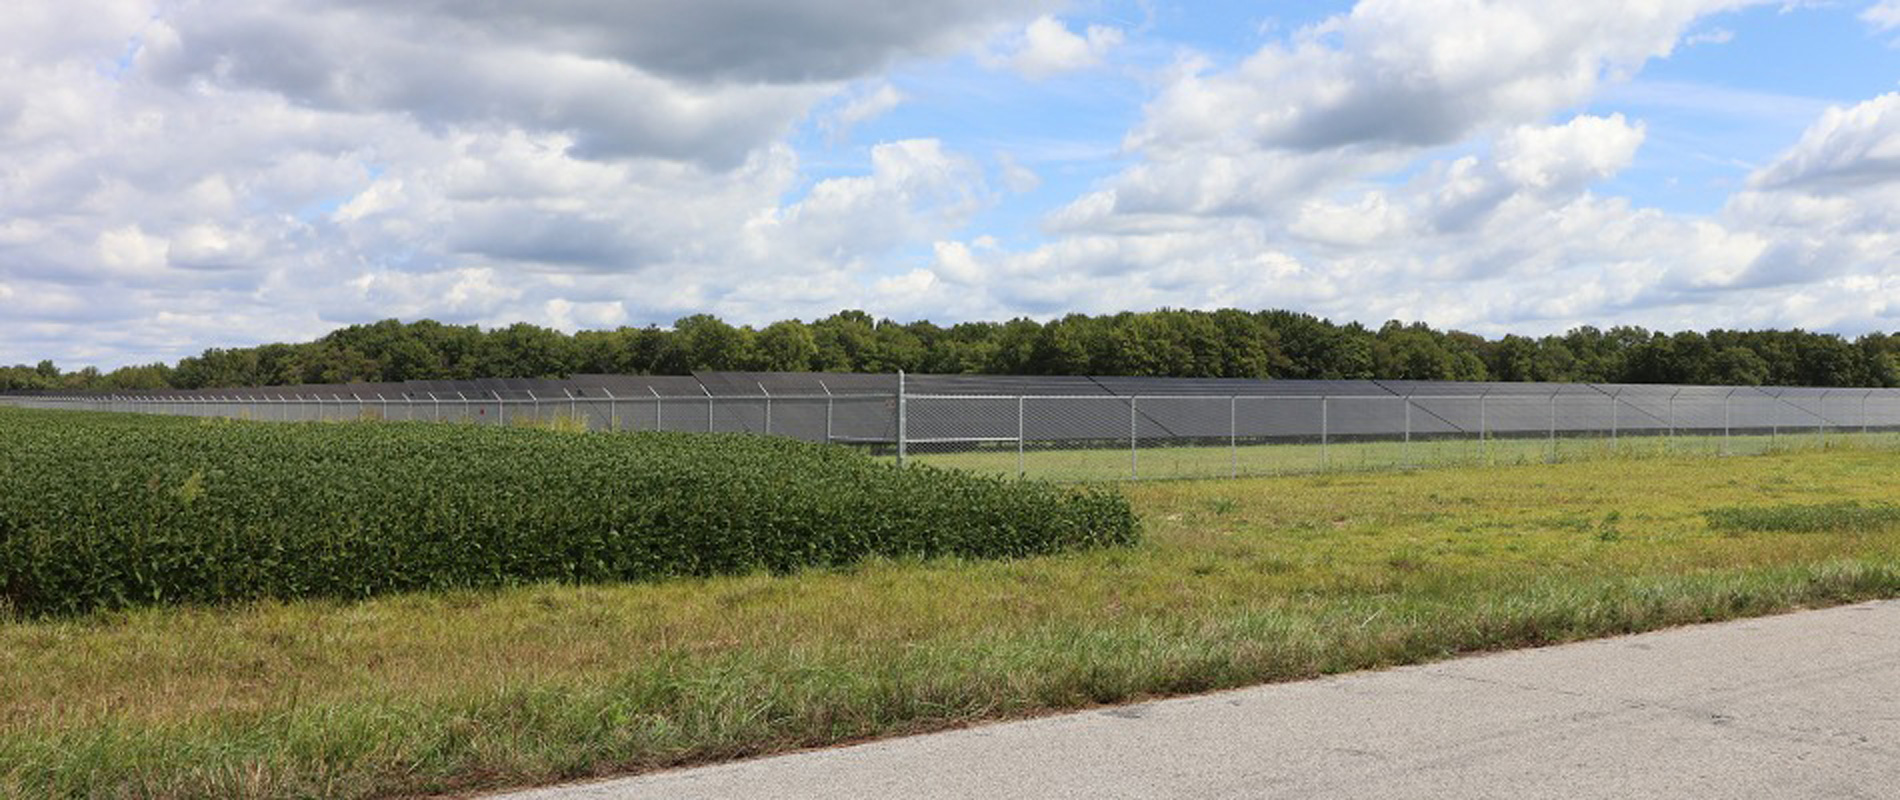 Street view of a solar farm behind a fence with grass.